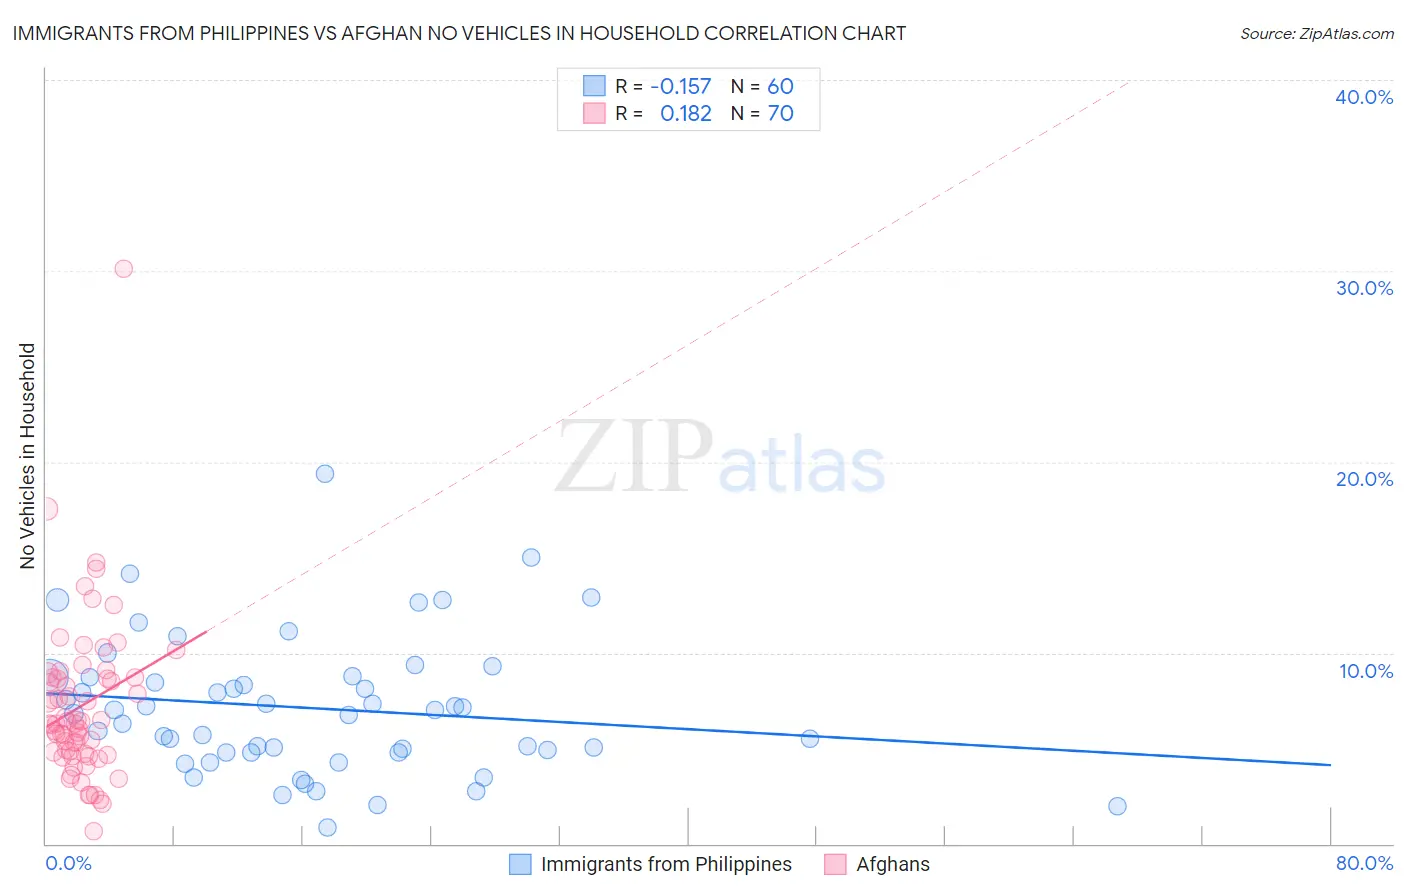 Immigrants from Philippines vs Afghan No Vehicles in Household